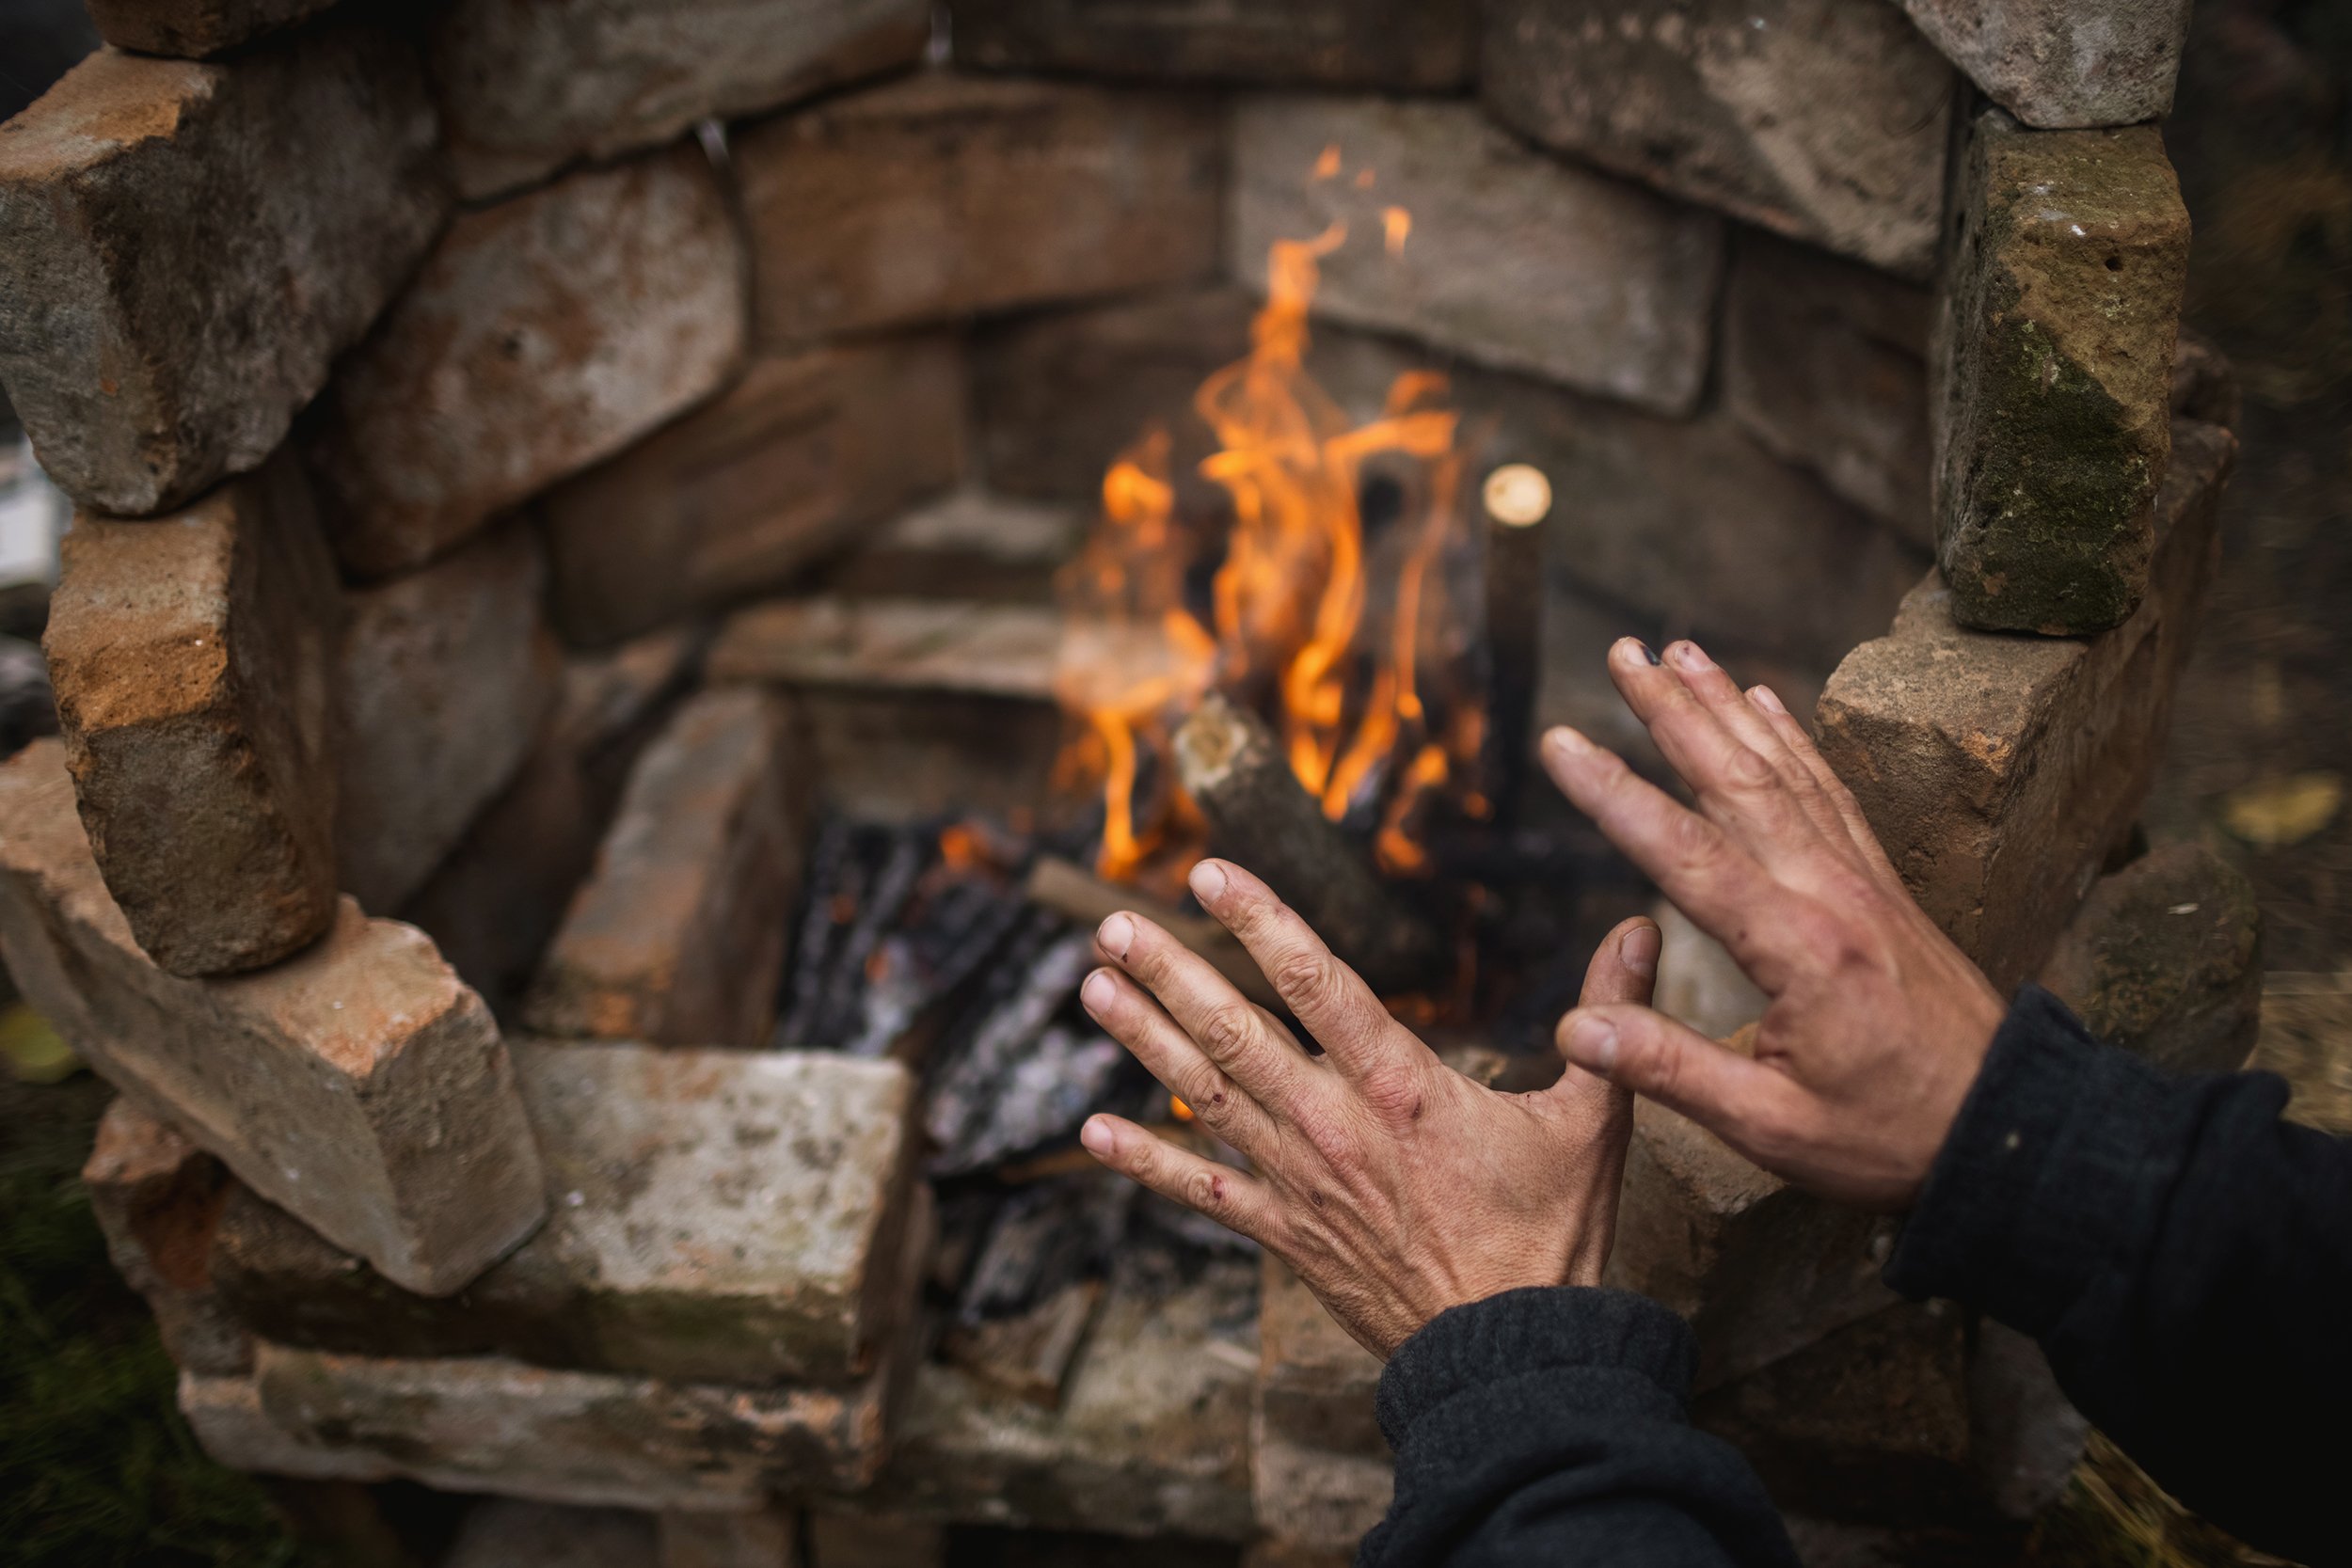  A participant warms up by the fire of the hastily built outdoor stove at the rocket stove building workshop of the Science of Nomad Life series launched in cooperation with a close friend of the community, Pál Szentgróti, and the community on Novemb